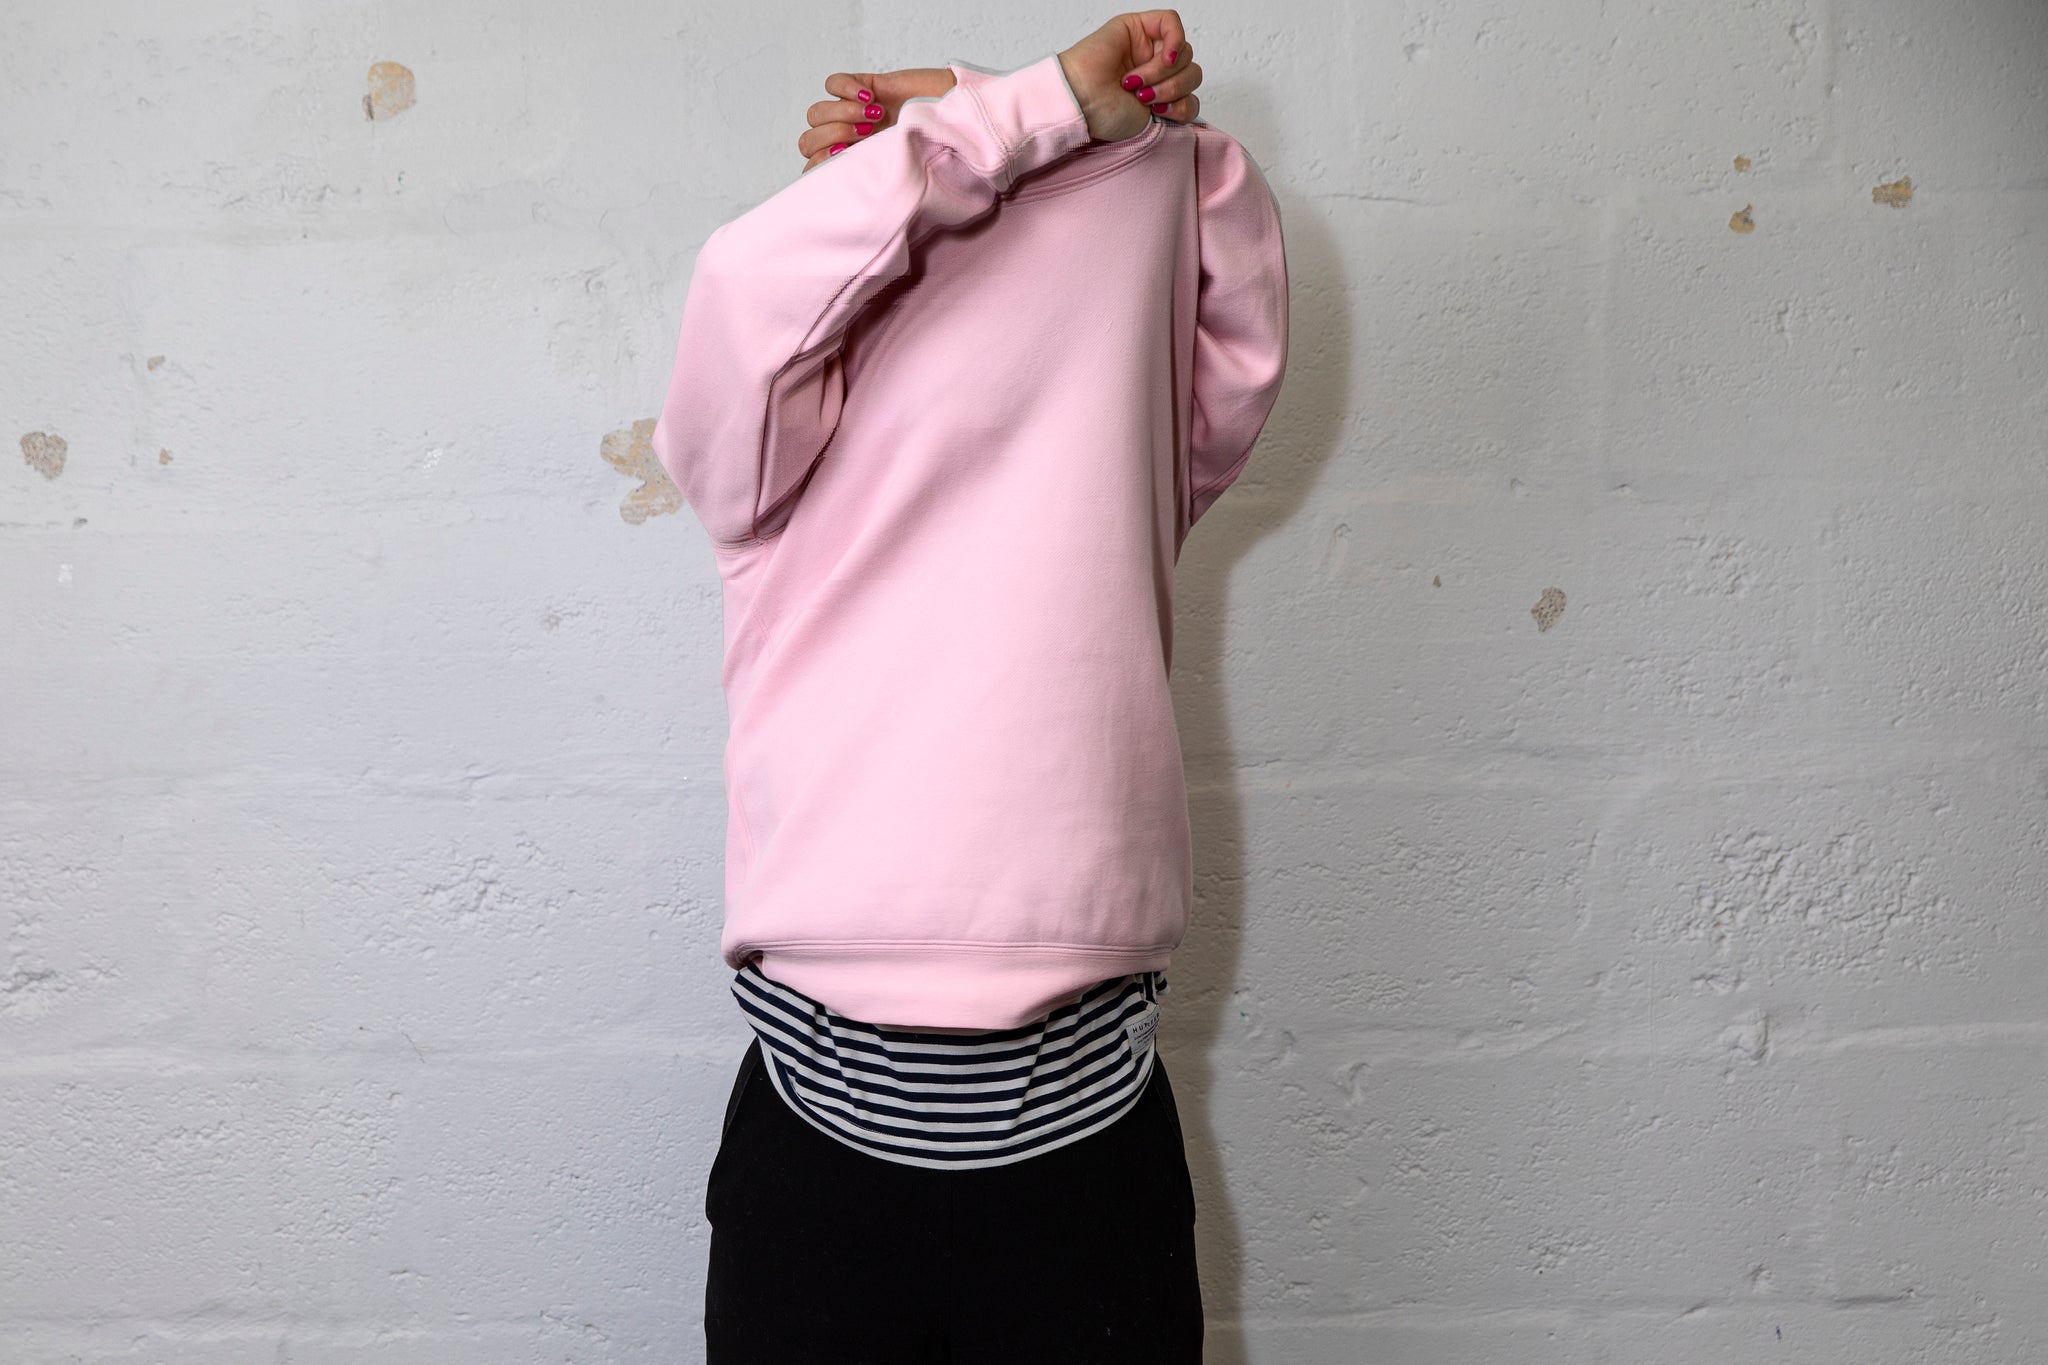 Person pulling a large pink jumper over their head with both hands above their head. White cinderbock background. 